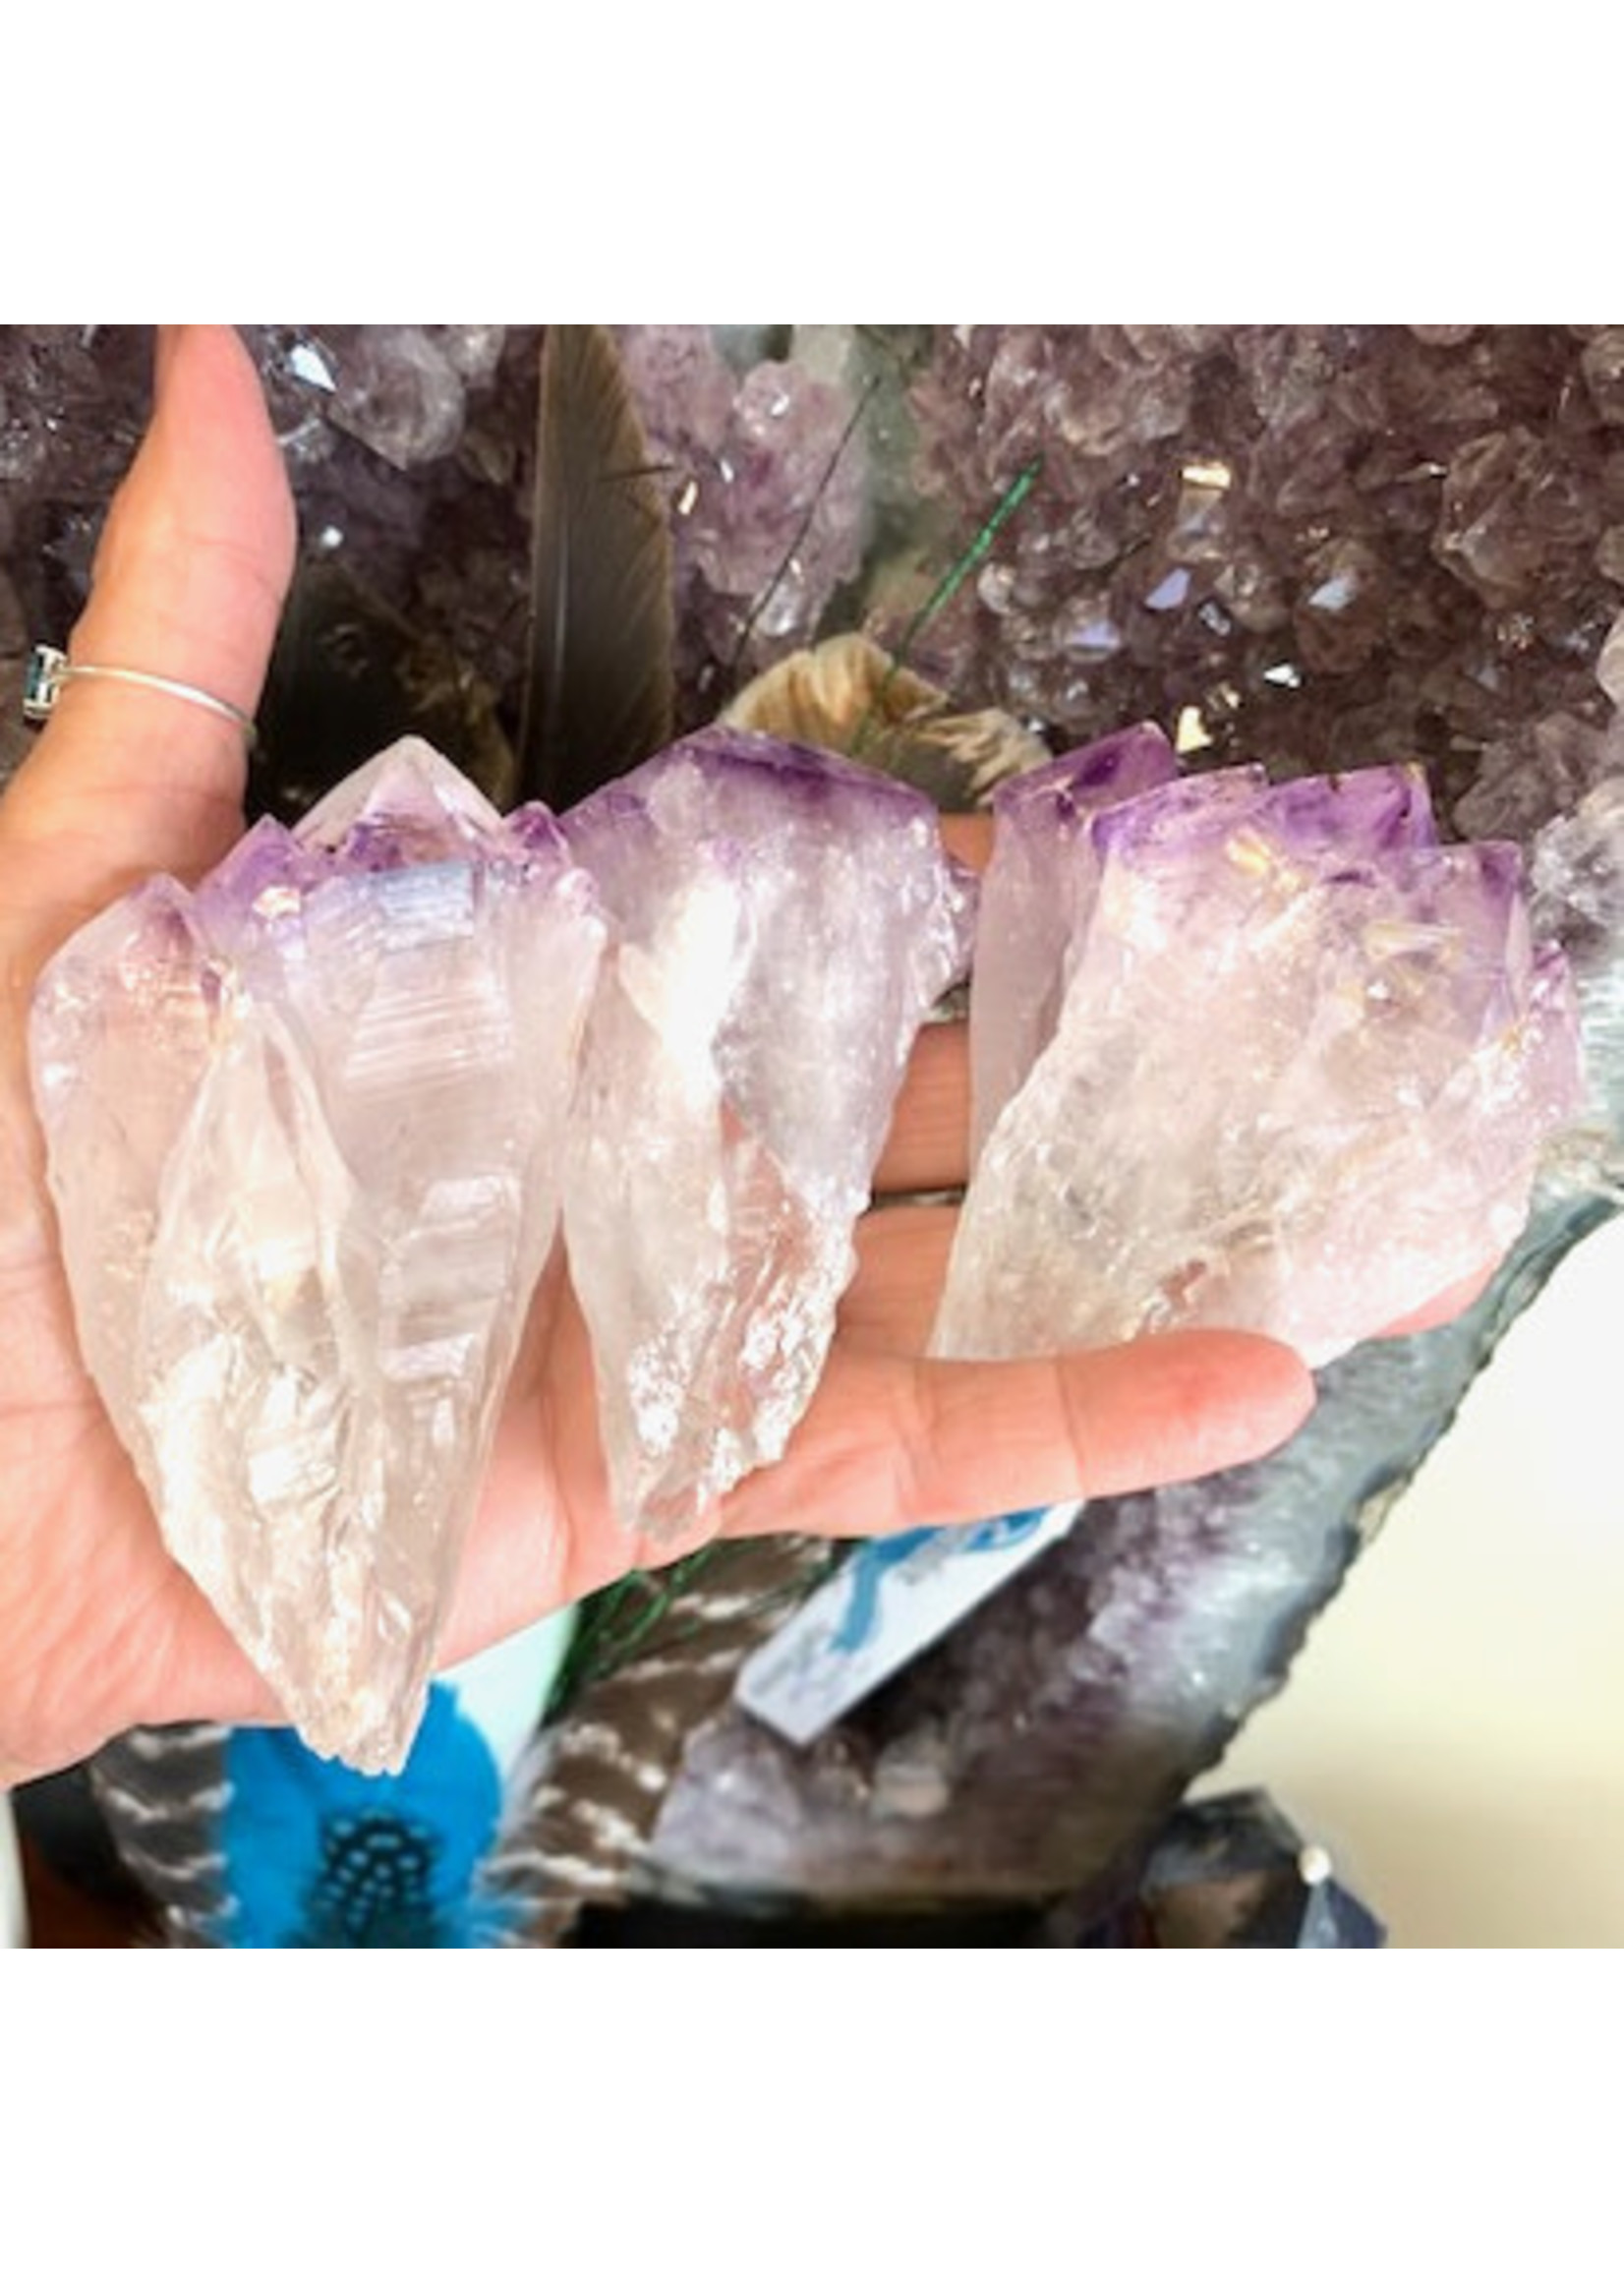 Amethyst Points for higher connection